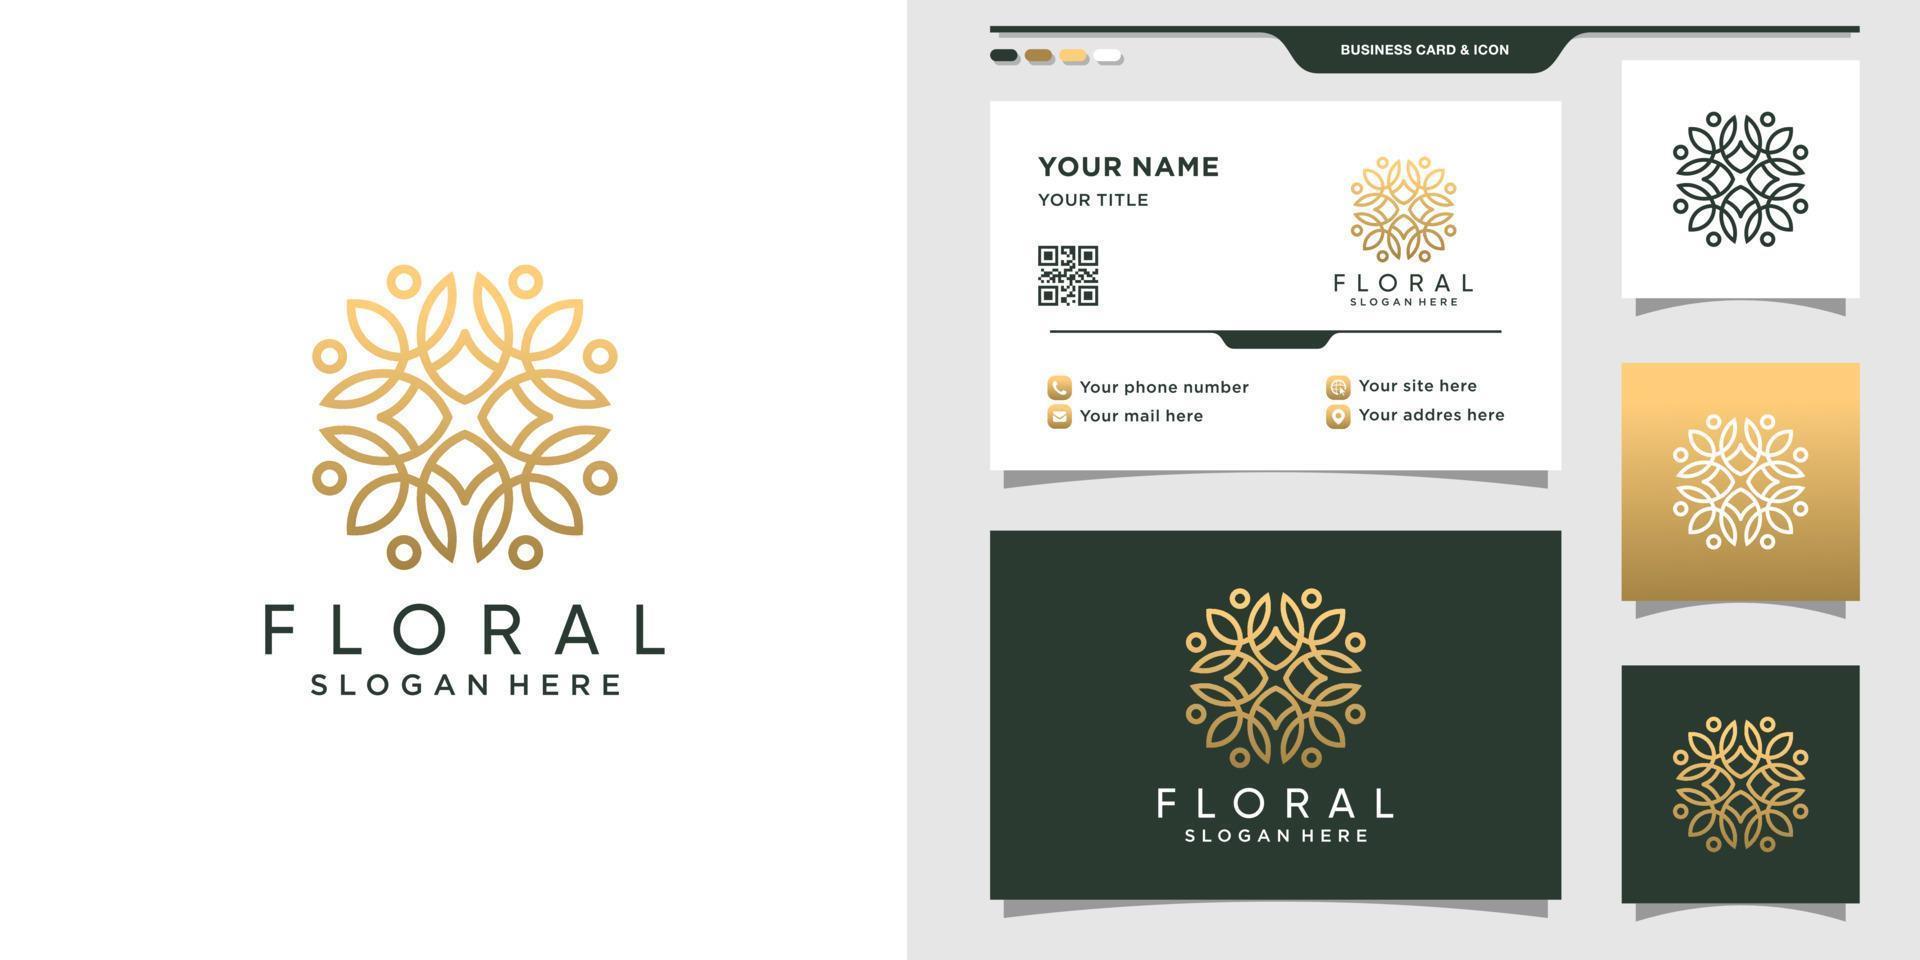 Floral logo design with line art style and business card design Premium Vector